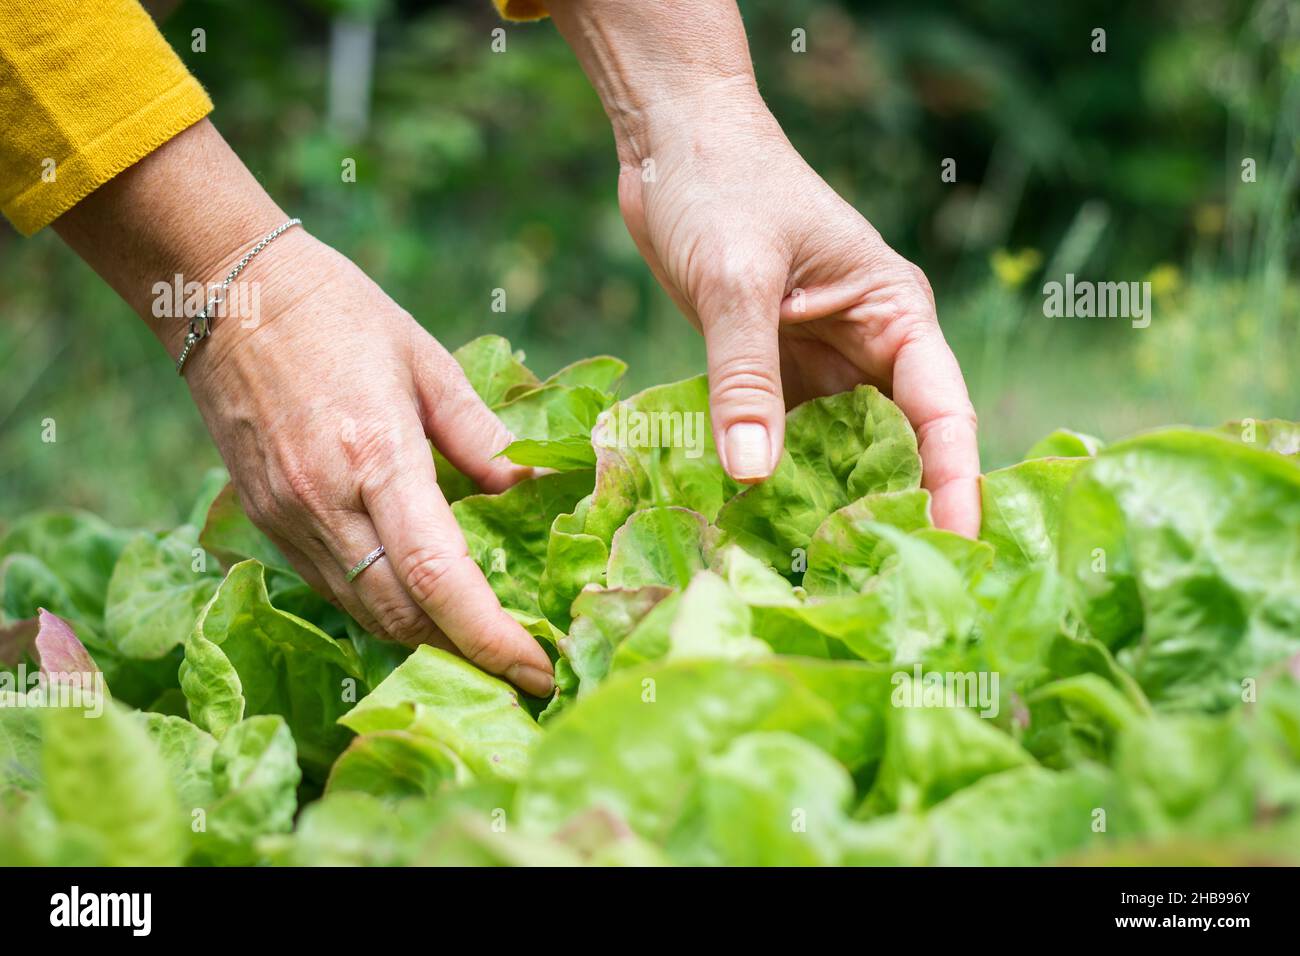 Harvesting organic homegrown lettuce from garden. Female hands picking up green salad from vegetable field Stock Photo